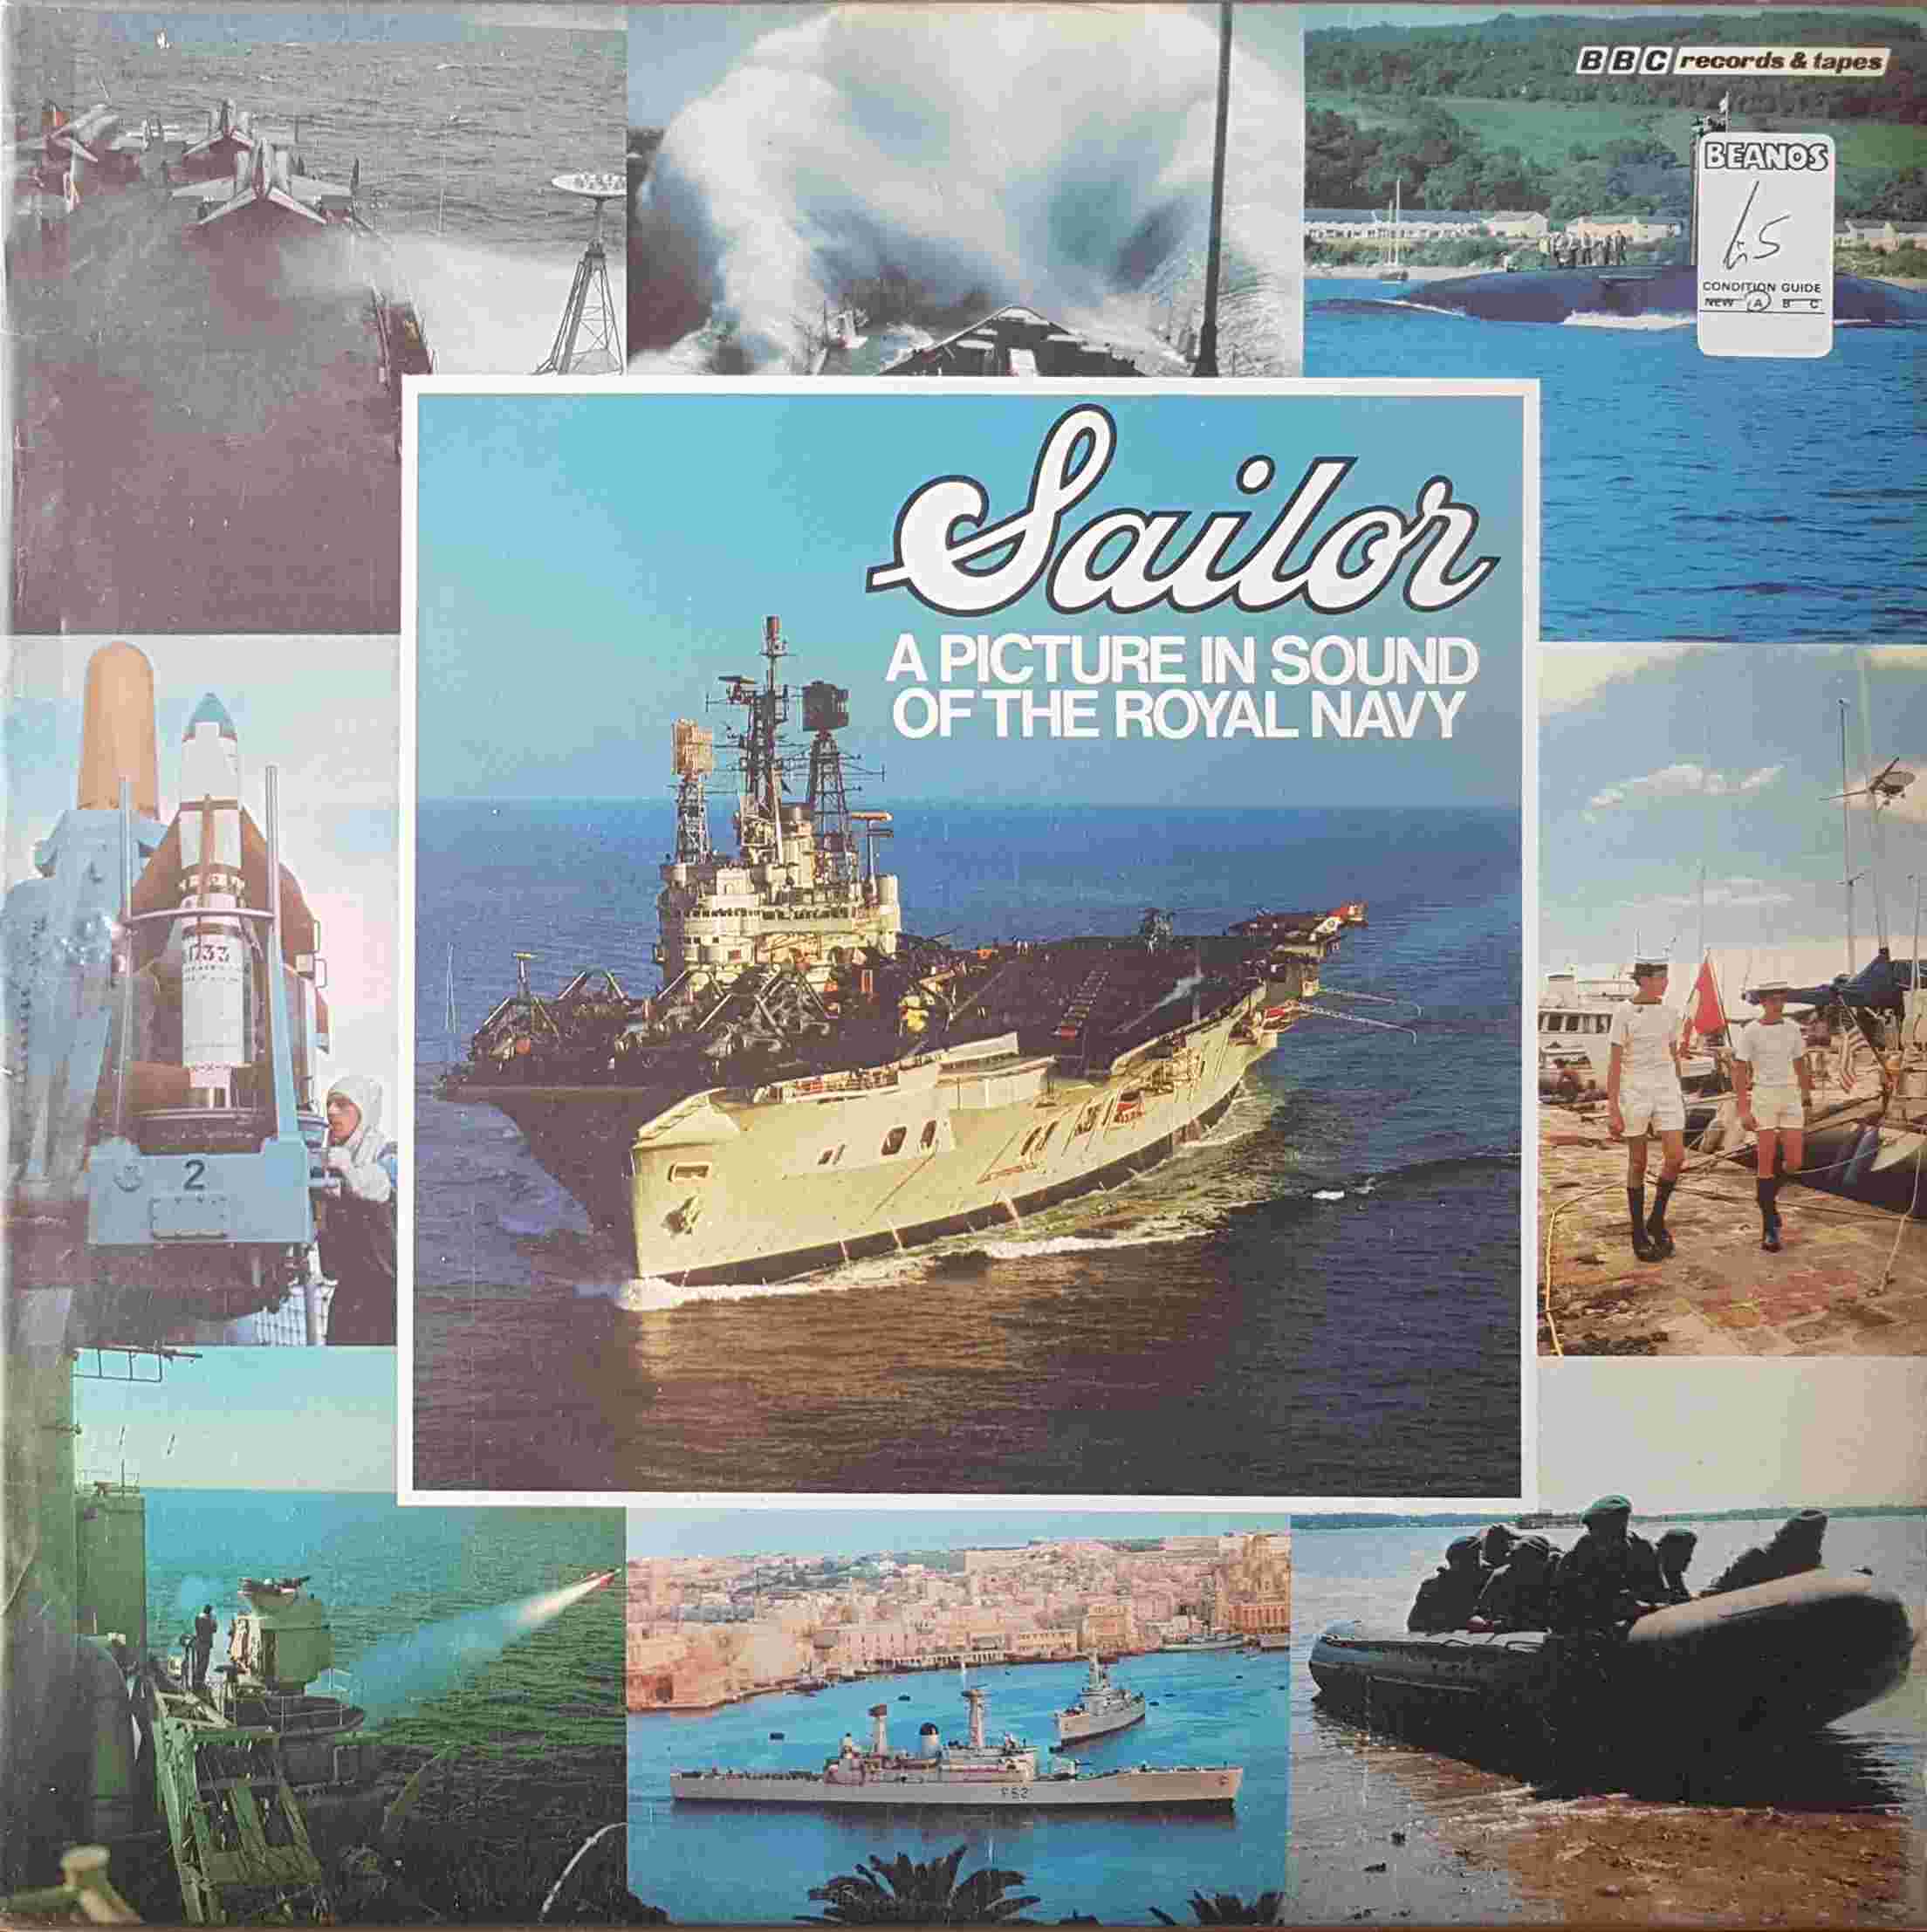 Picture of REH 318 Sailor - A picture of sound by artist Various from the BBC albums - Records and Tapes library